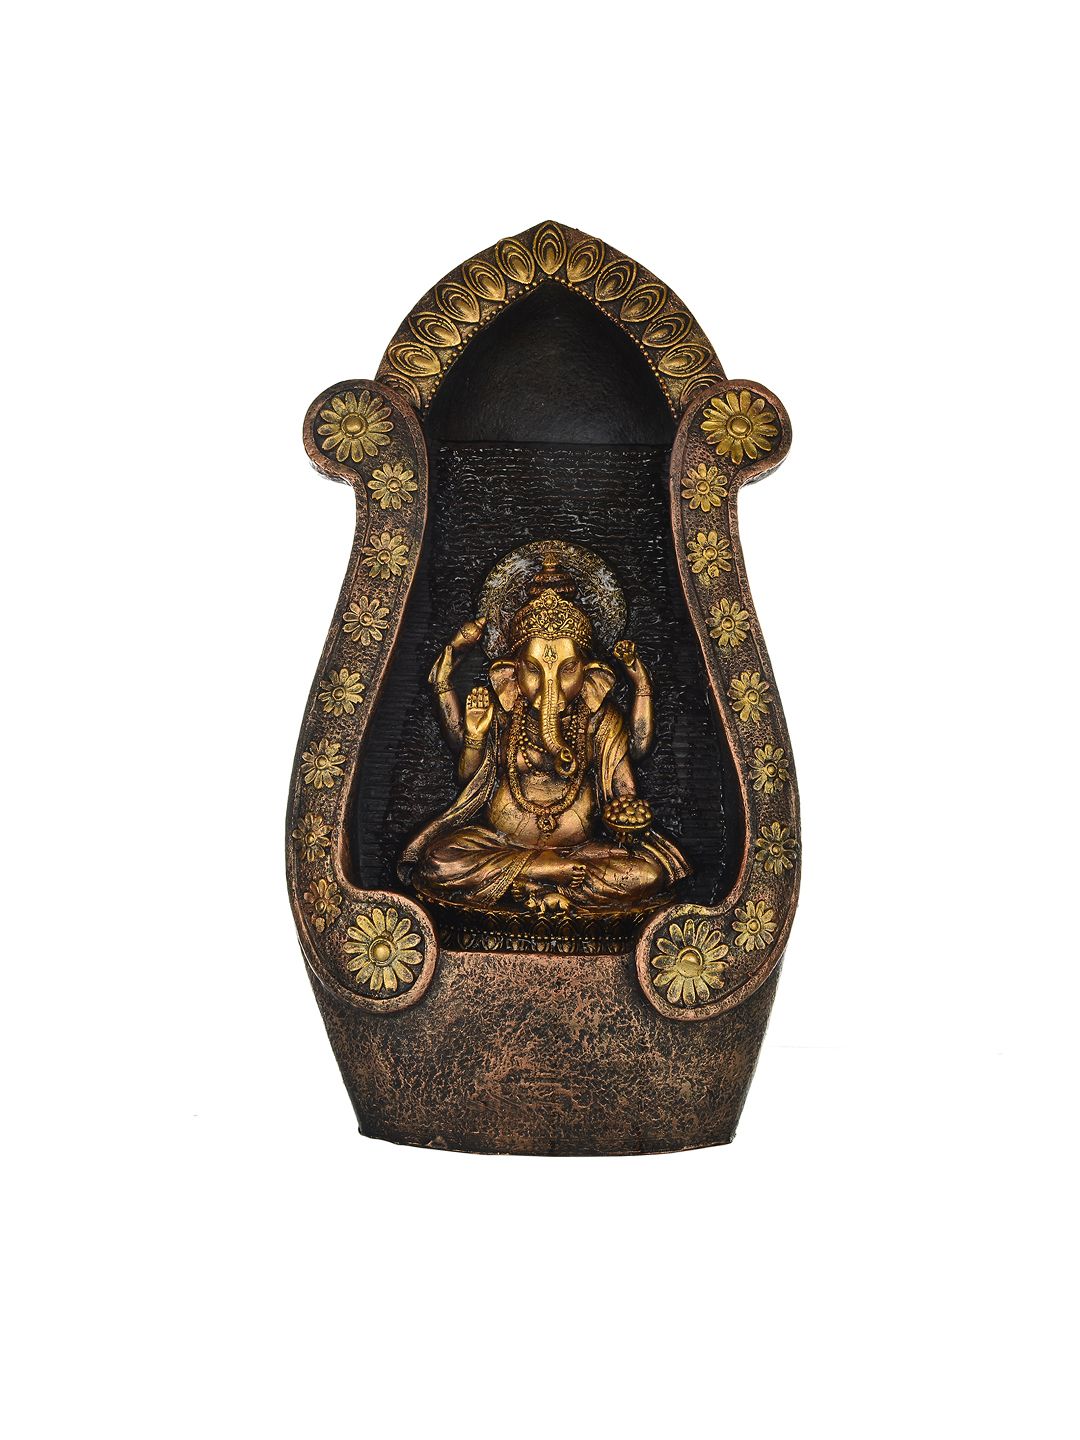 eCraftIndia Gold-Toned Premium Decorative Lord Ganesh Electrical Waterfall Fountain Price in India